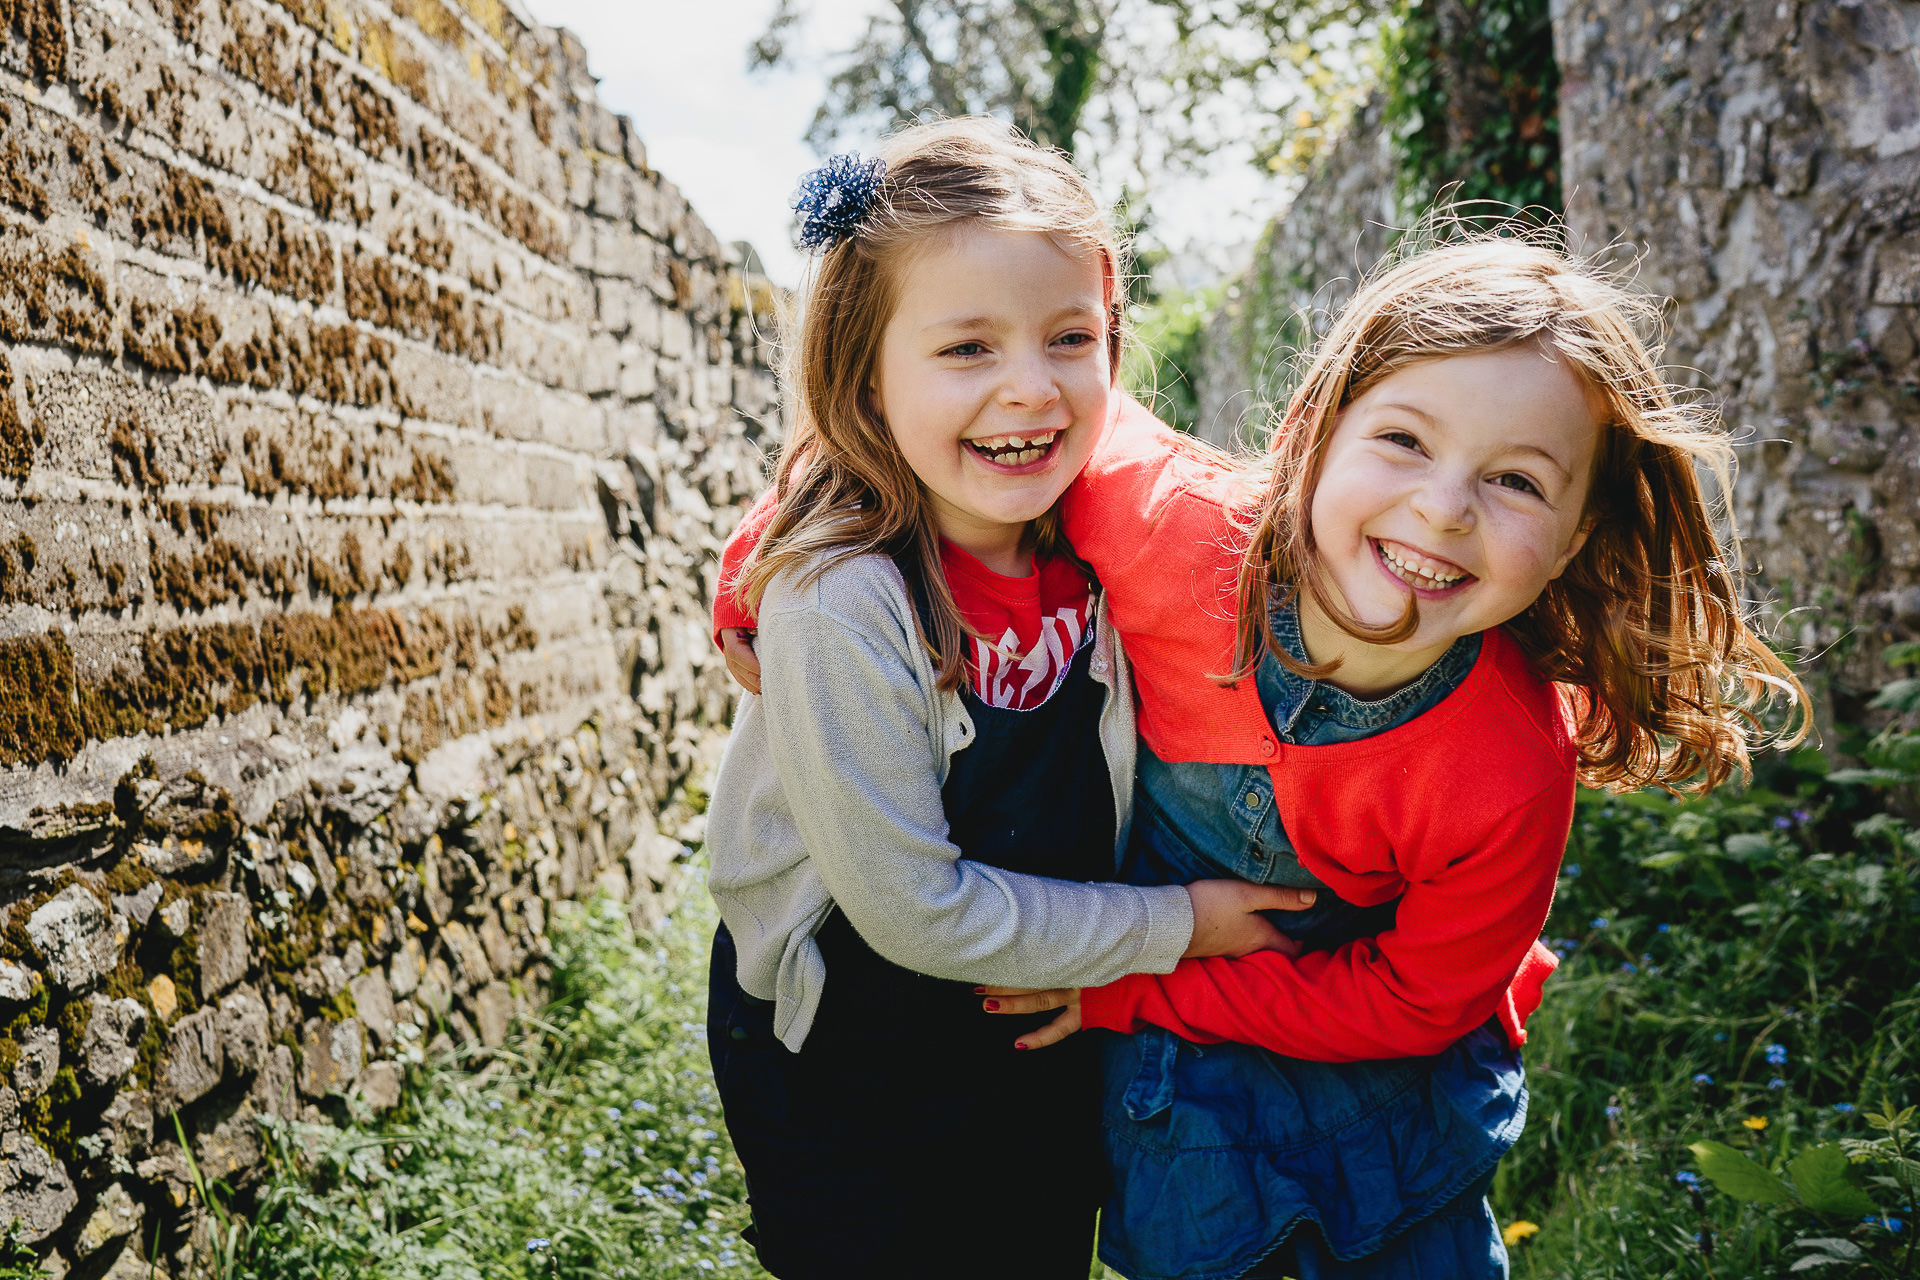 Two girls laughing together in an alleyway with a relaxed family photographer capturing the fun